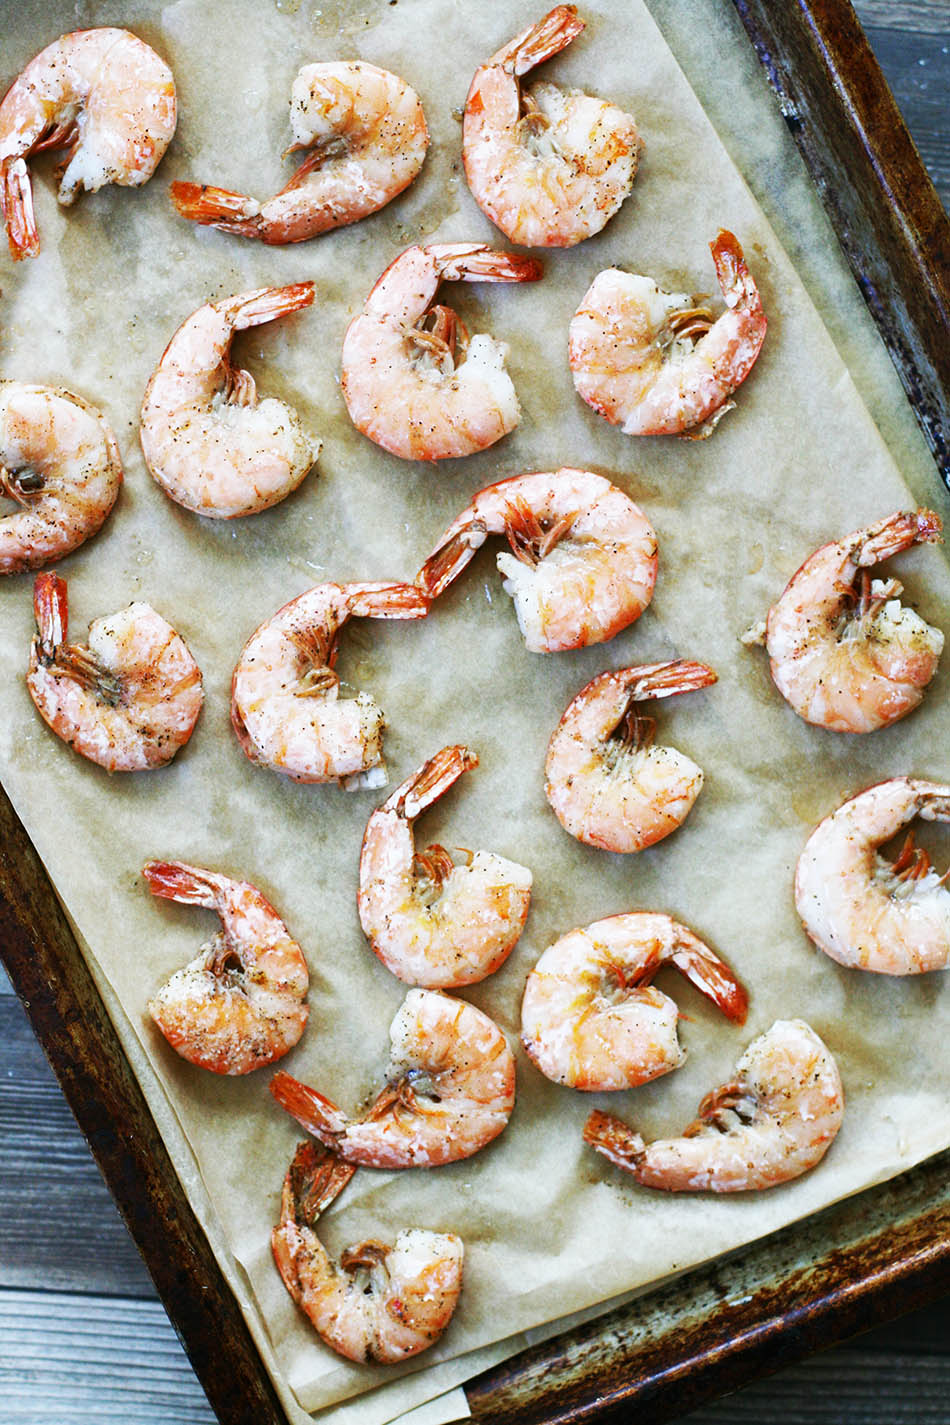 How to make oven-broiled shrimp at home: The easiest way to make shrimp!